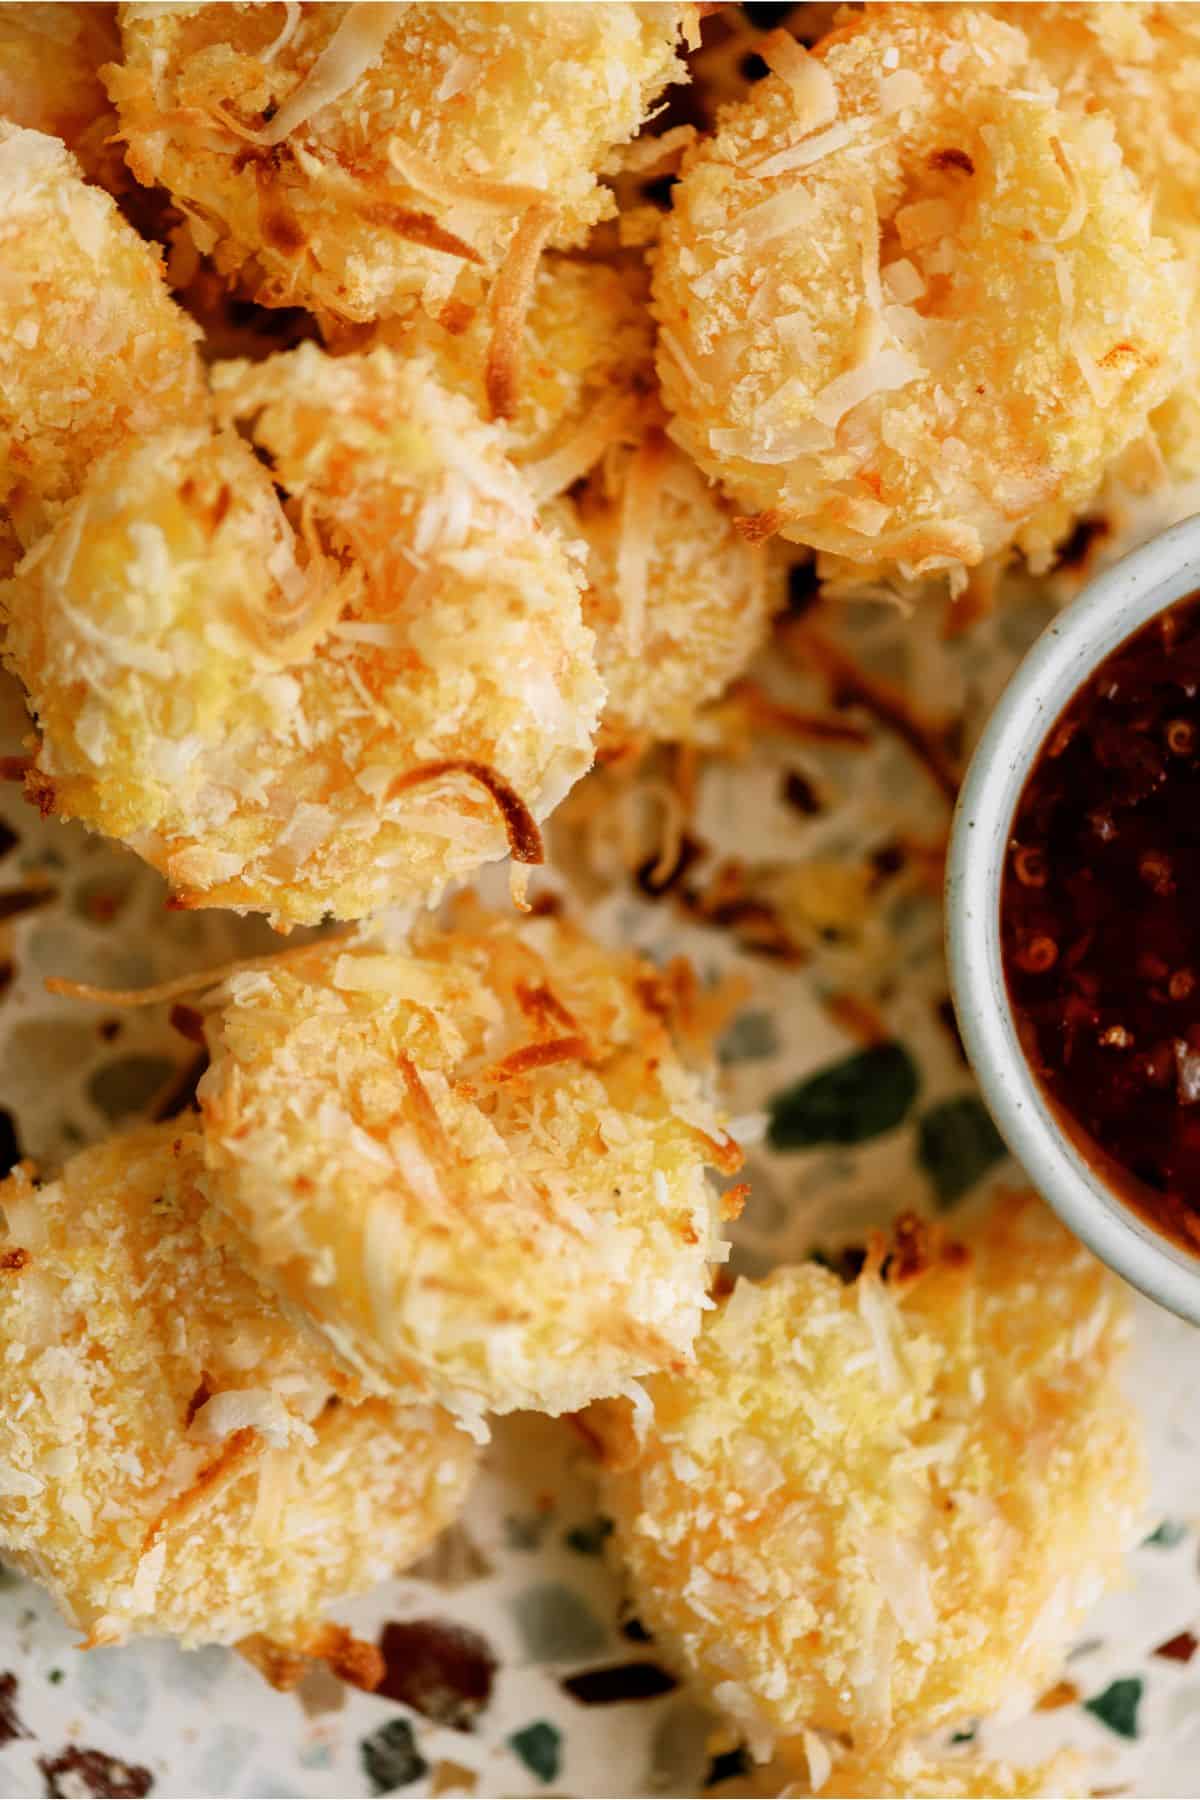 Top view of a plate of Air Fryer Coconut Shrimp